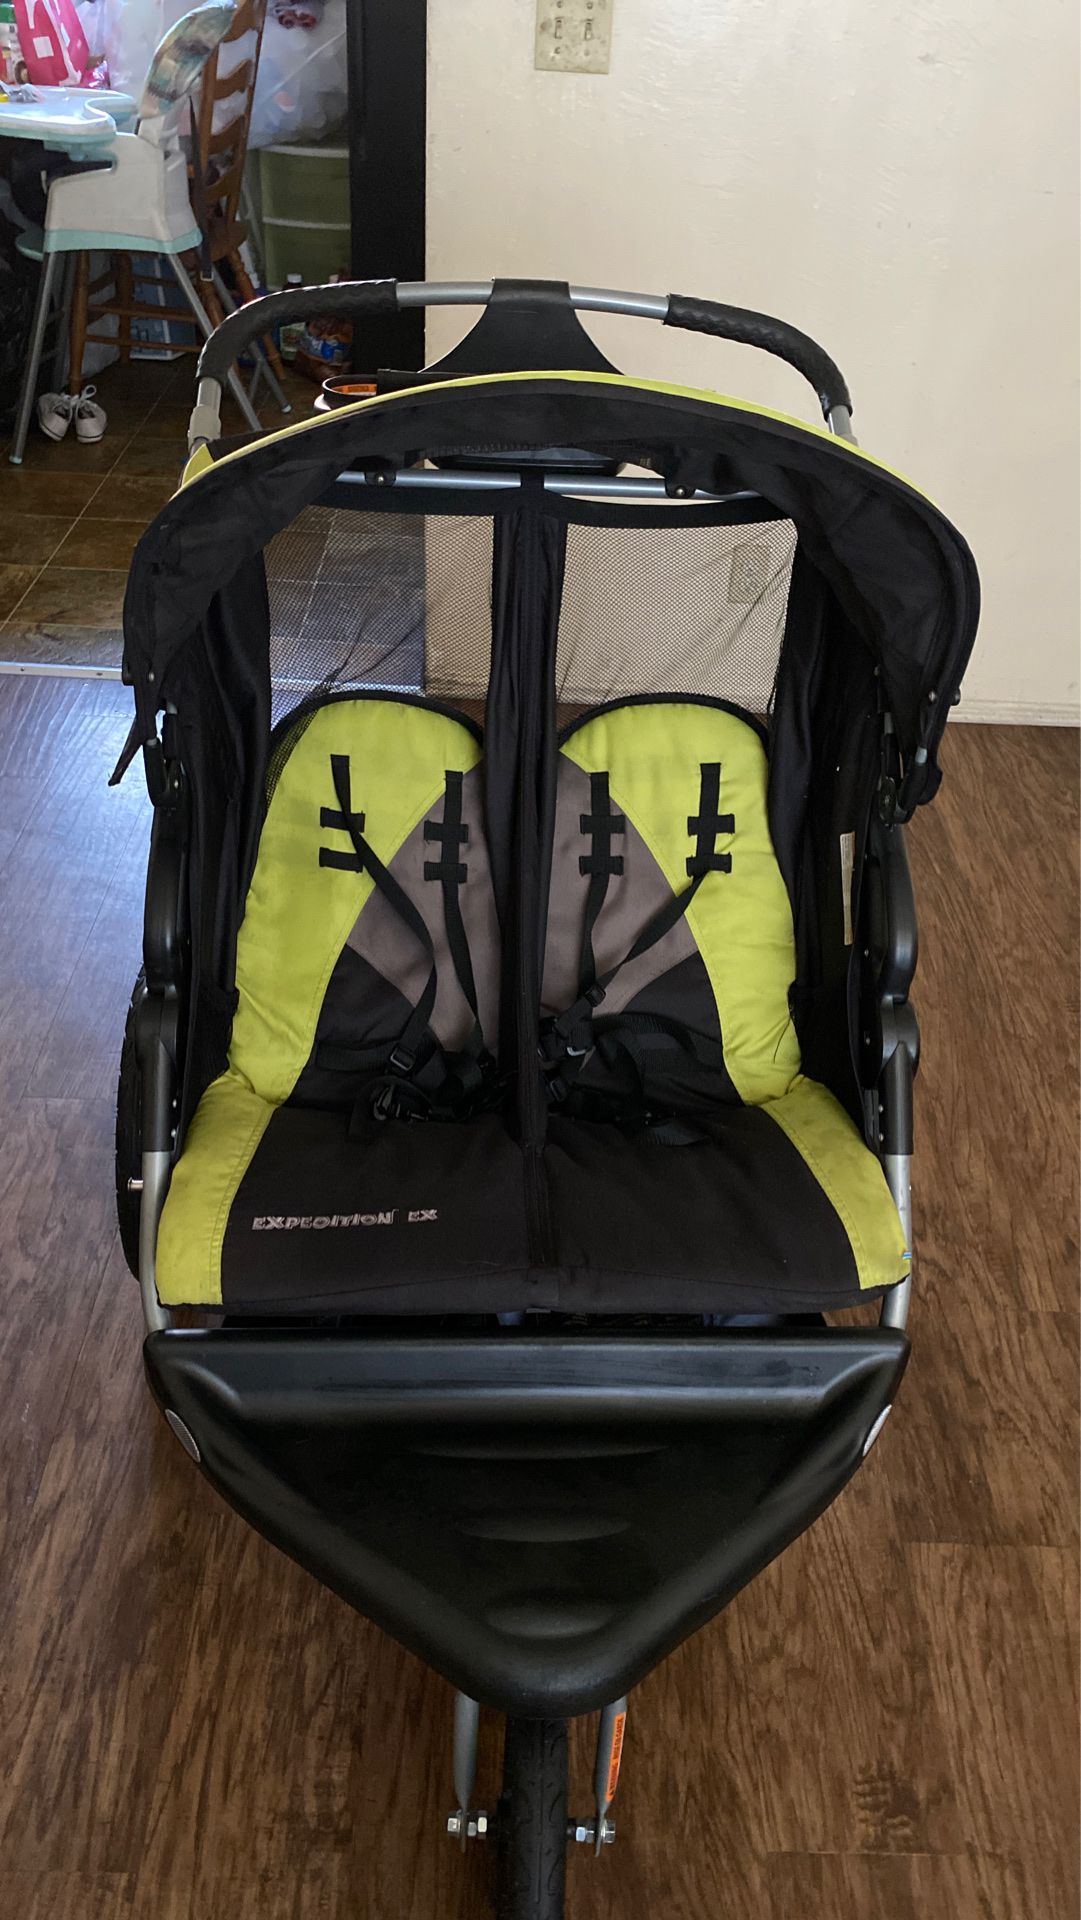 Baby trend double jogger stroller